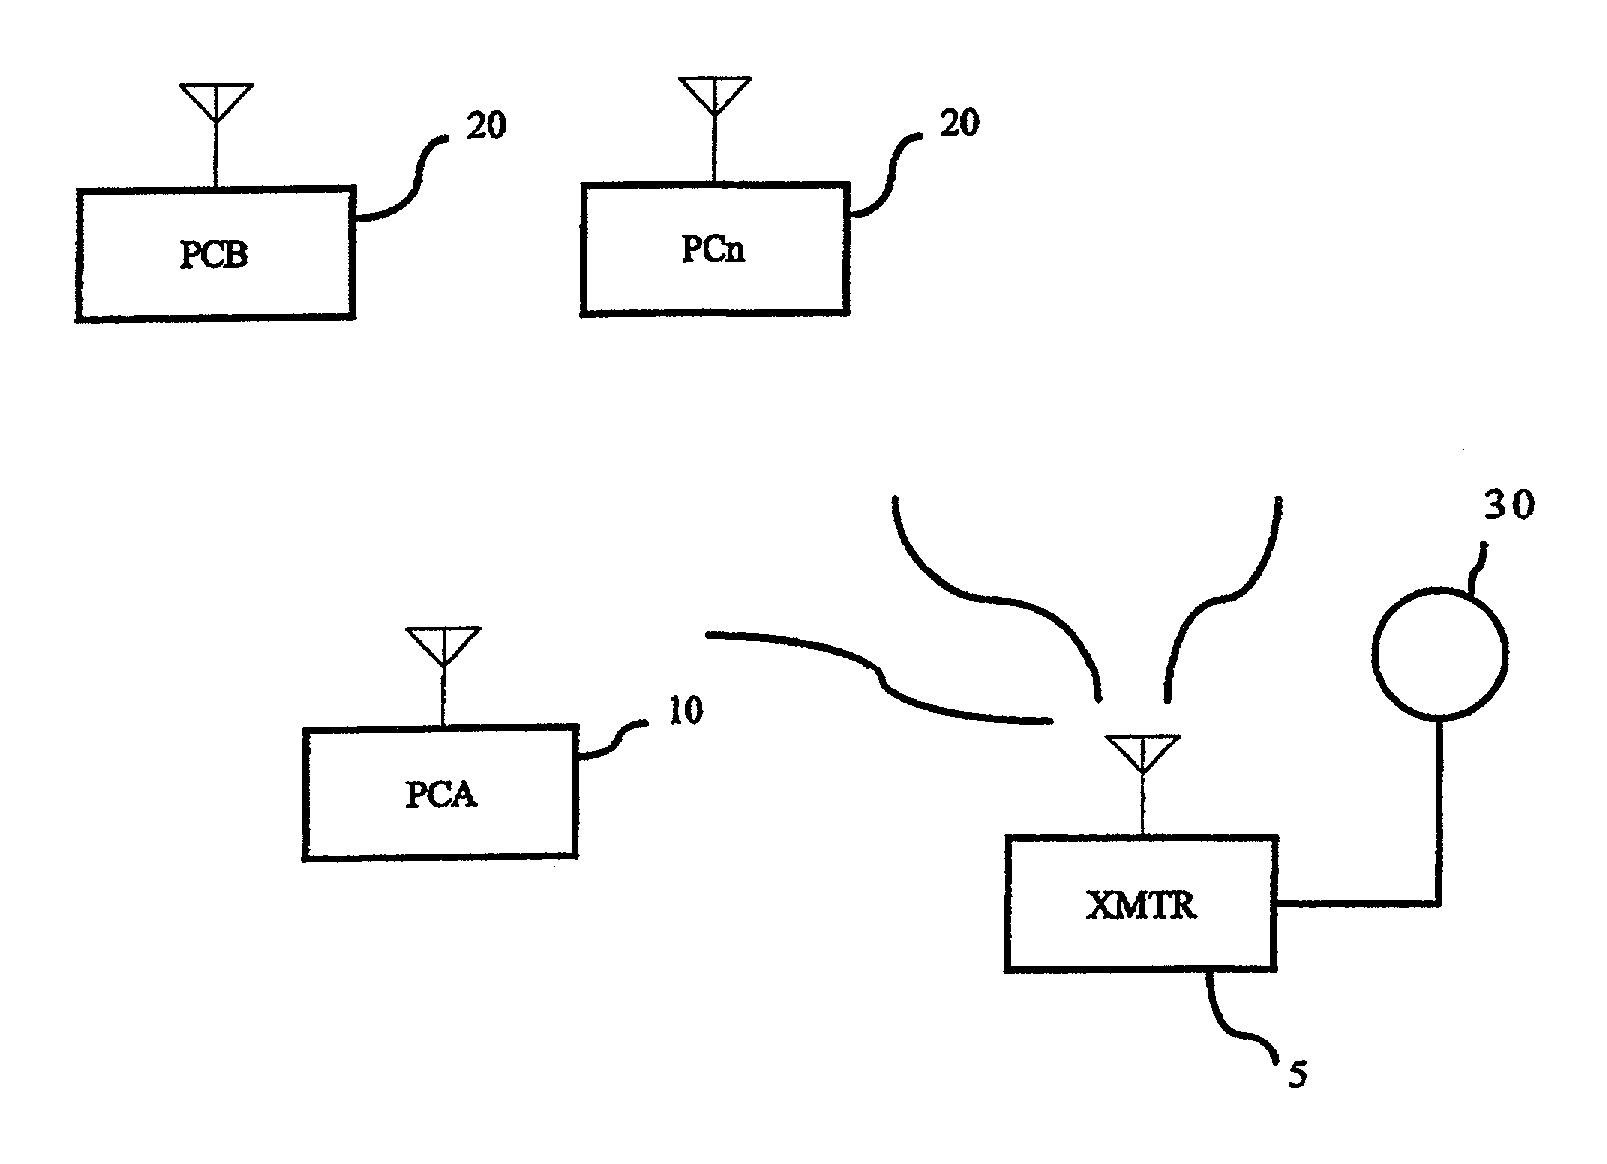 Method to synchronize playback of multicast audio streams on a local network